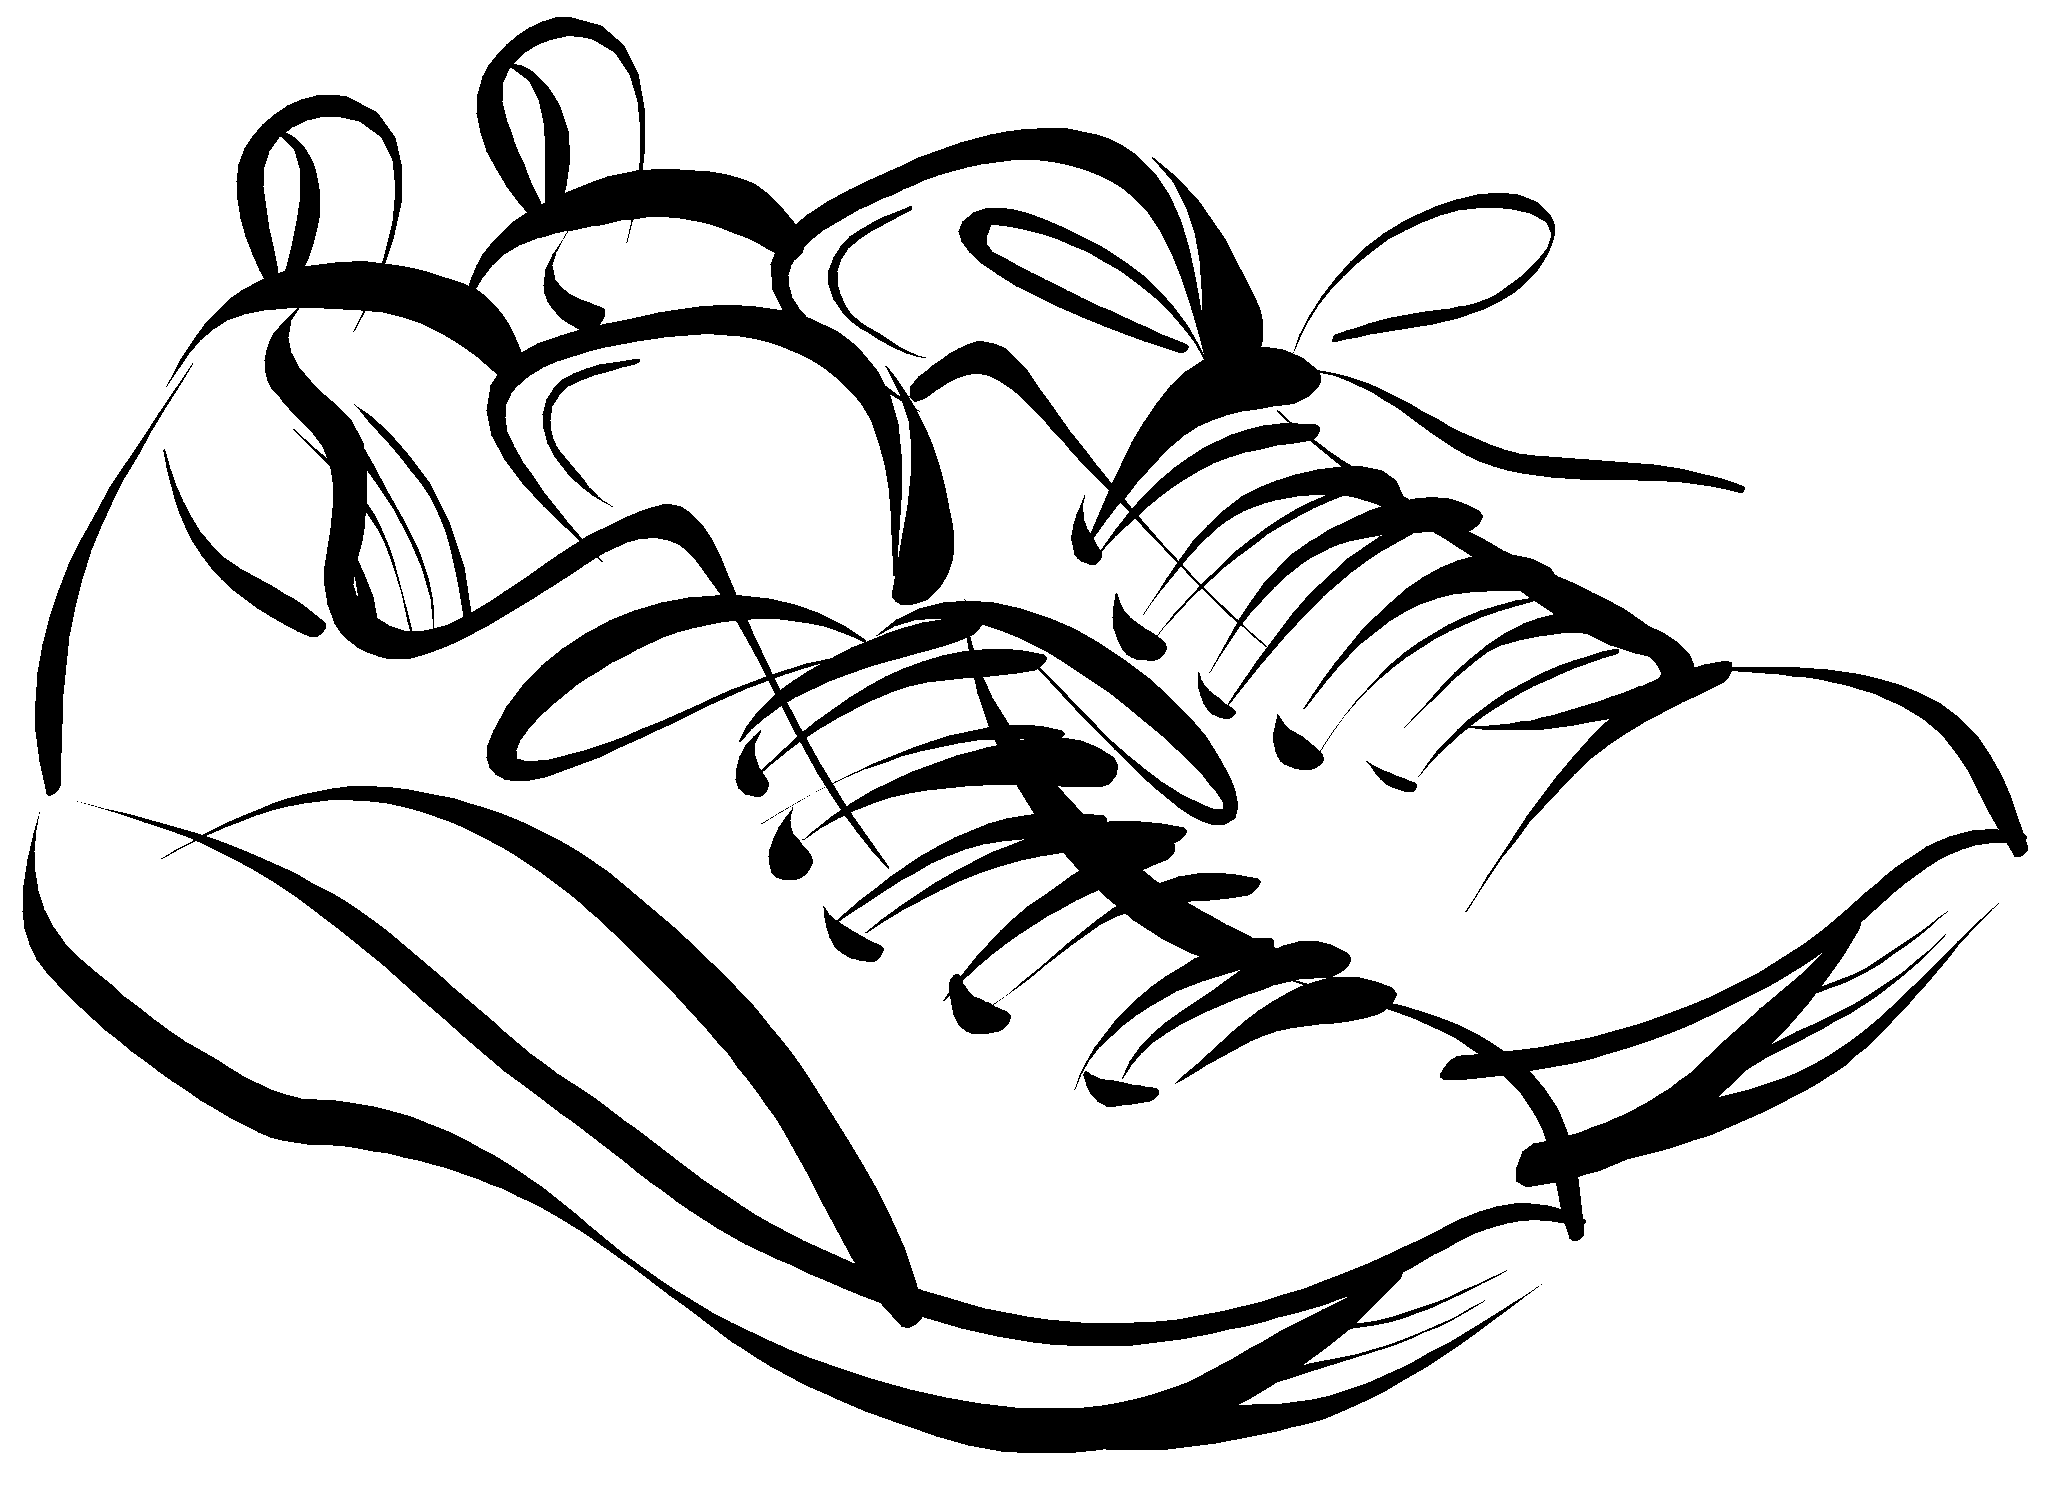 Pin Drawn Sneakers Black And White #1 - Shoes Black And White, Transparent background PNG HD thumbnail